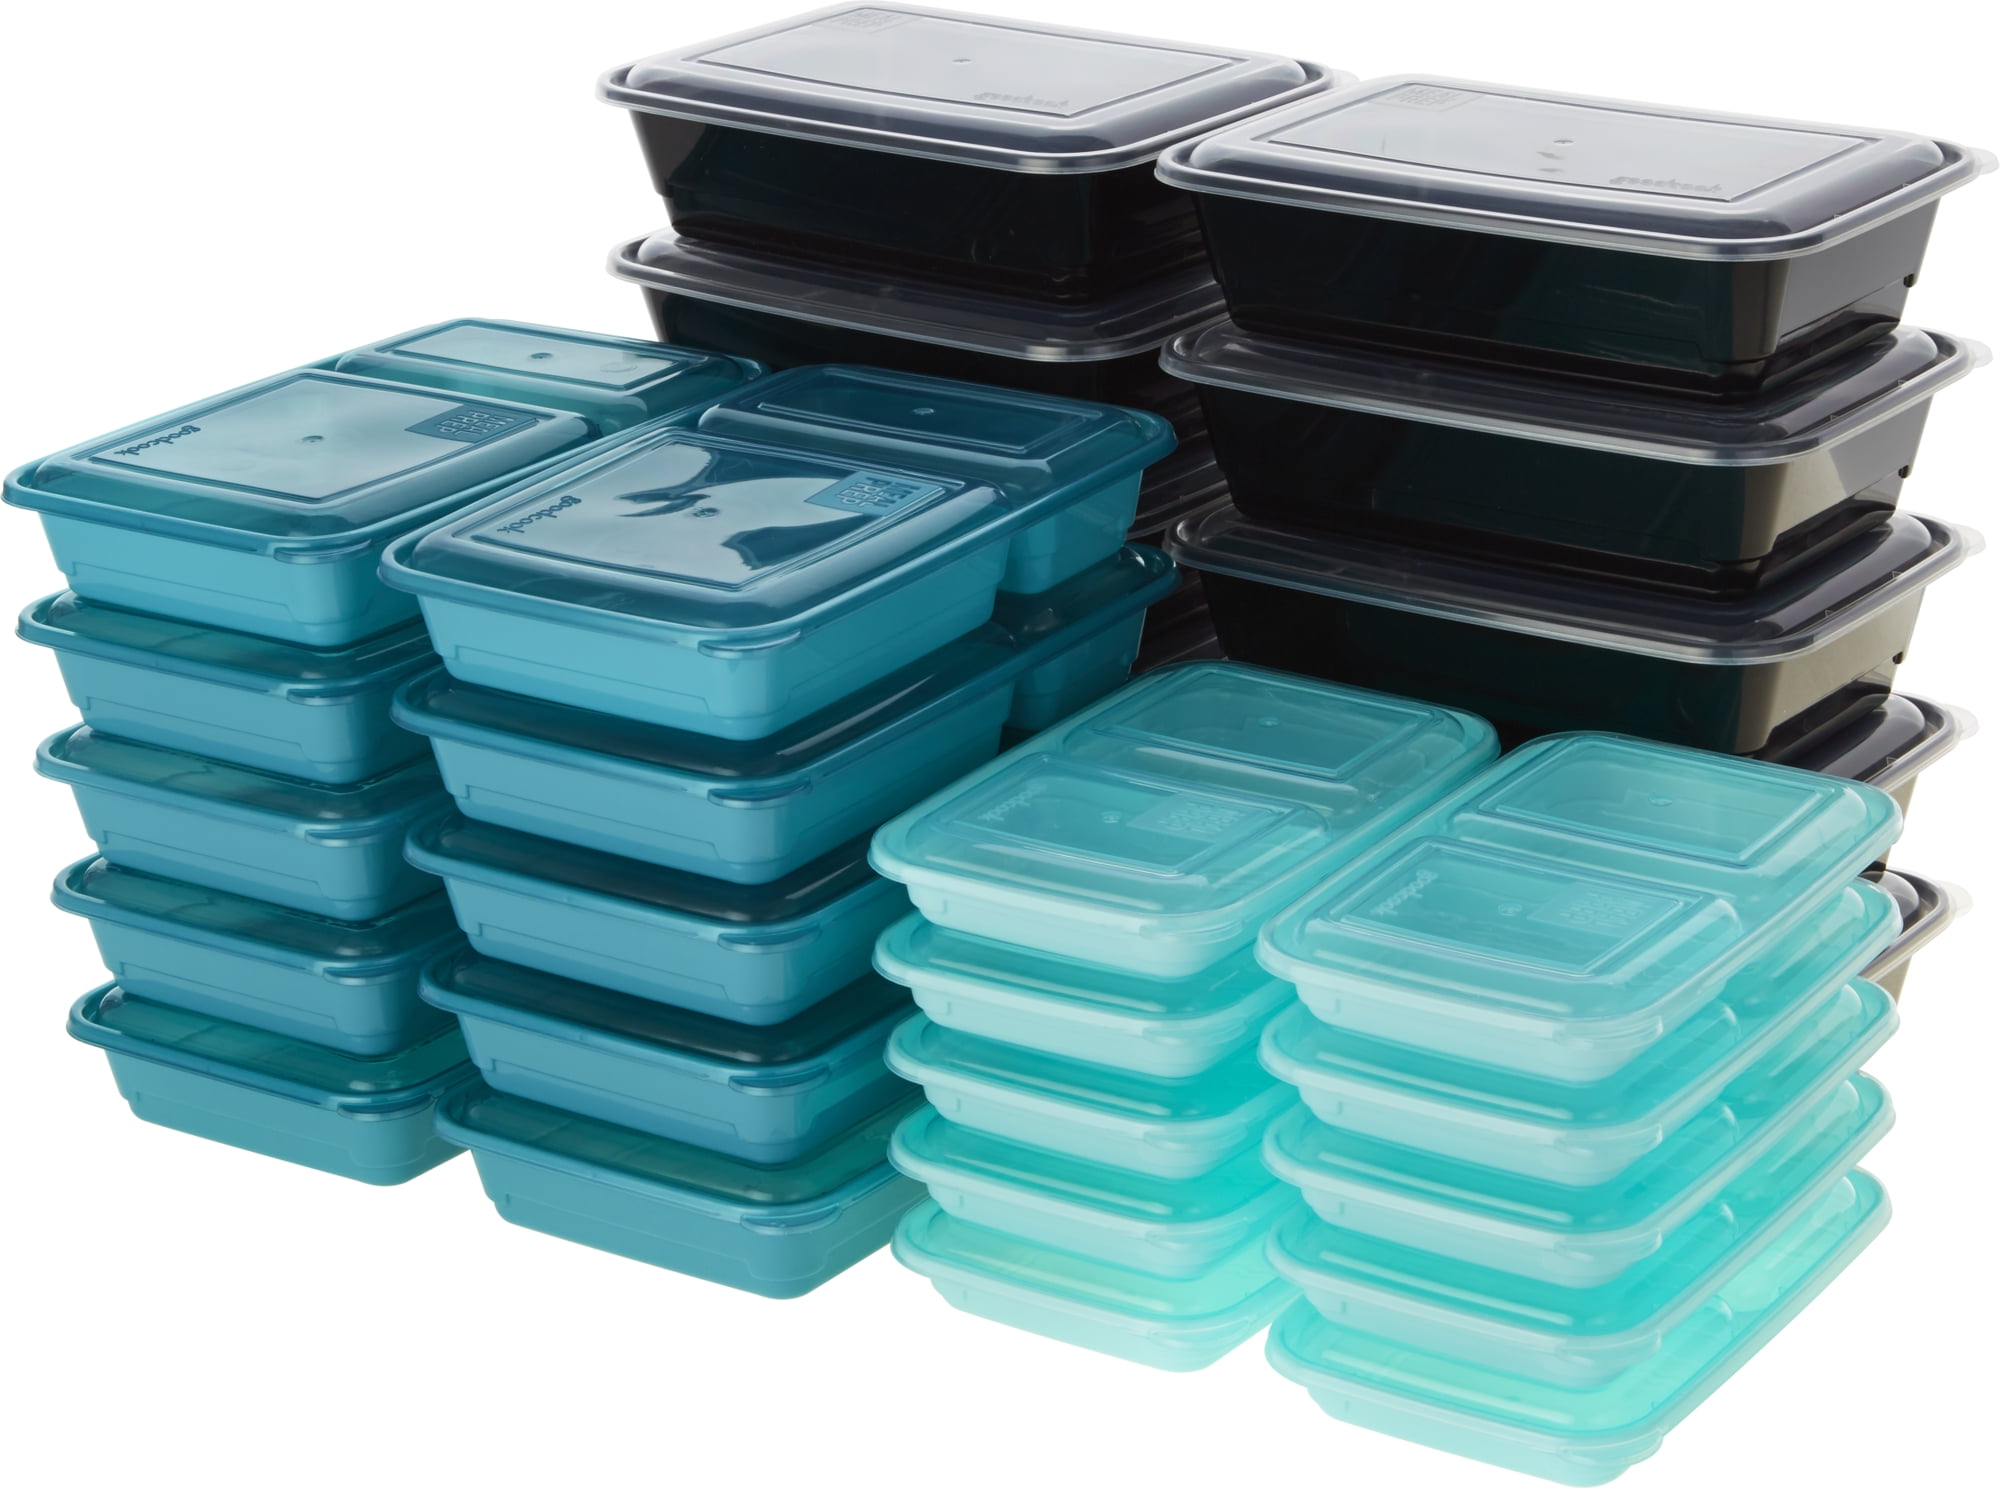 Goodcook Containers + Lids, Meal Prep, 10 Pack